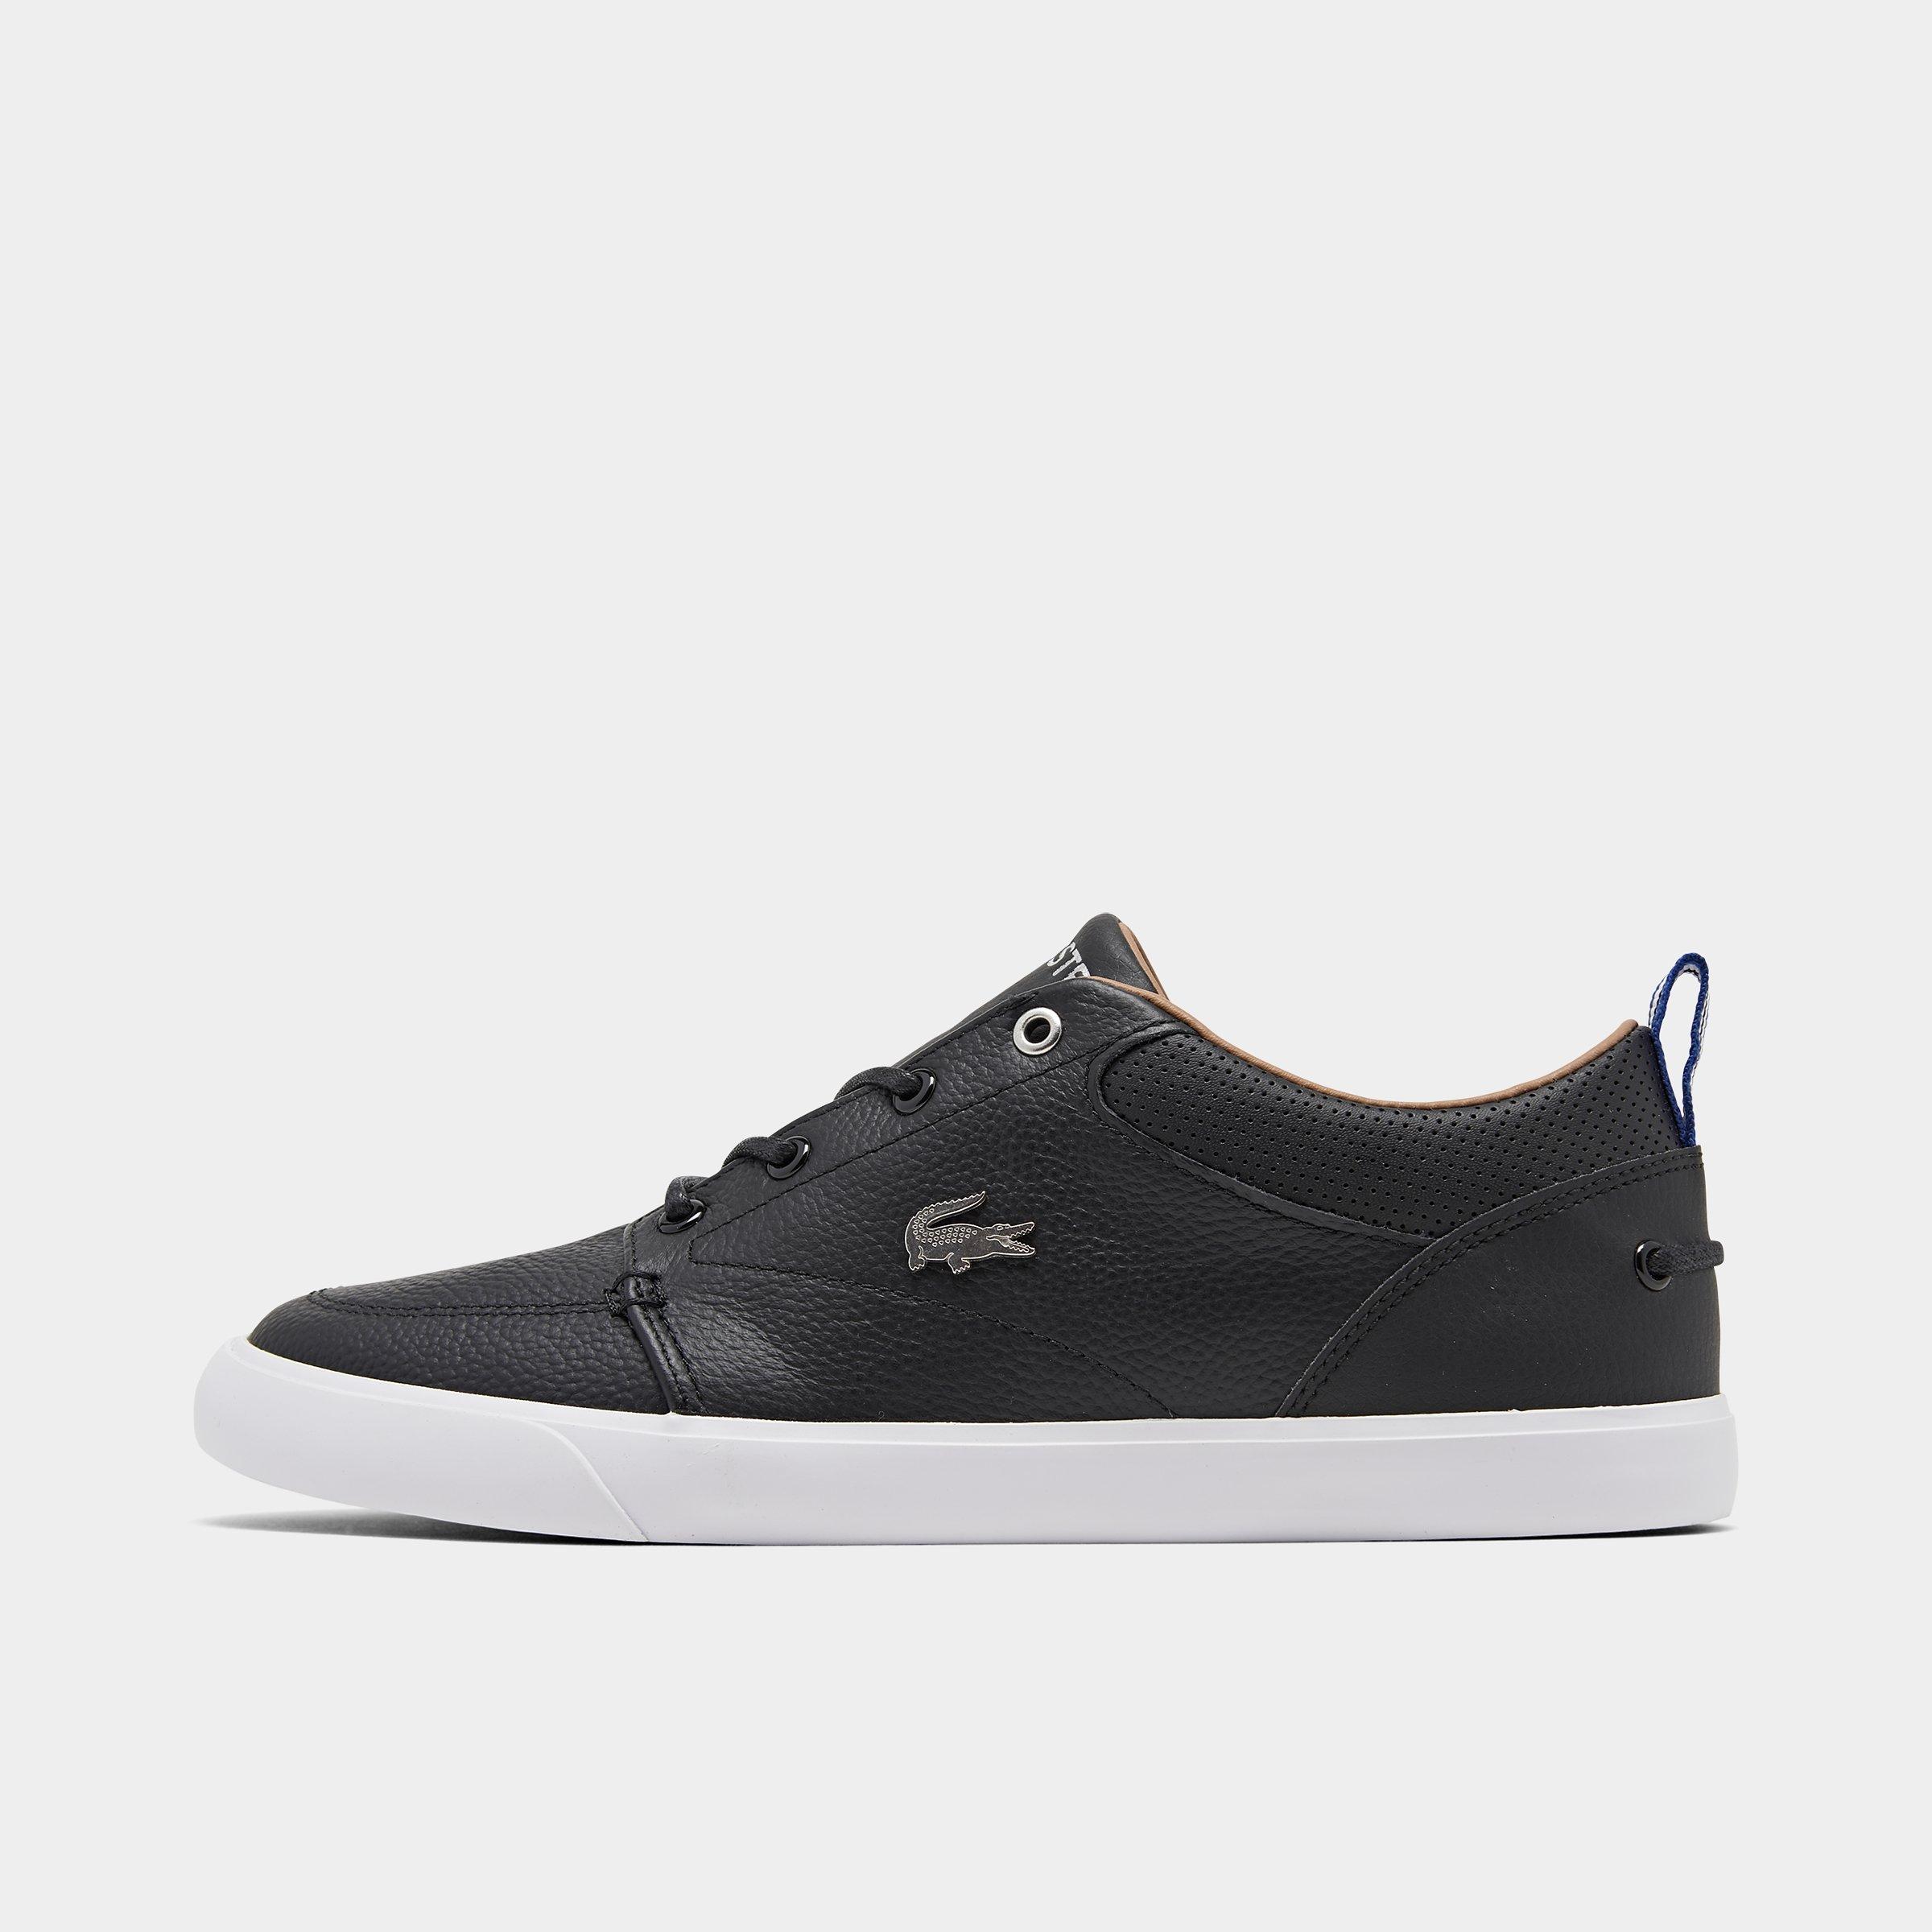 casual lacoste shoes